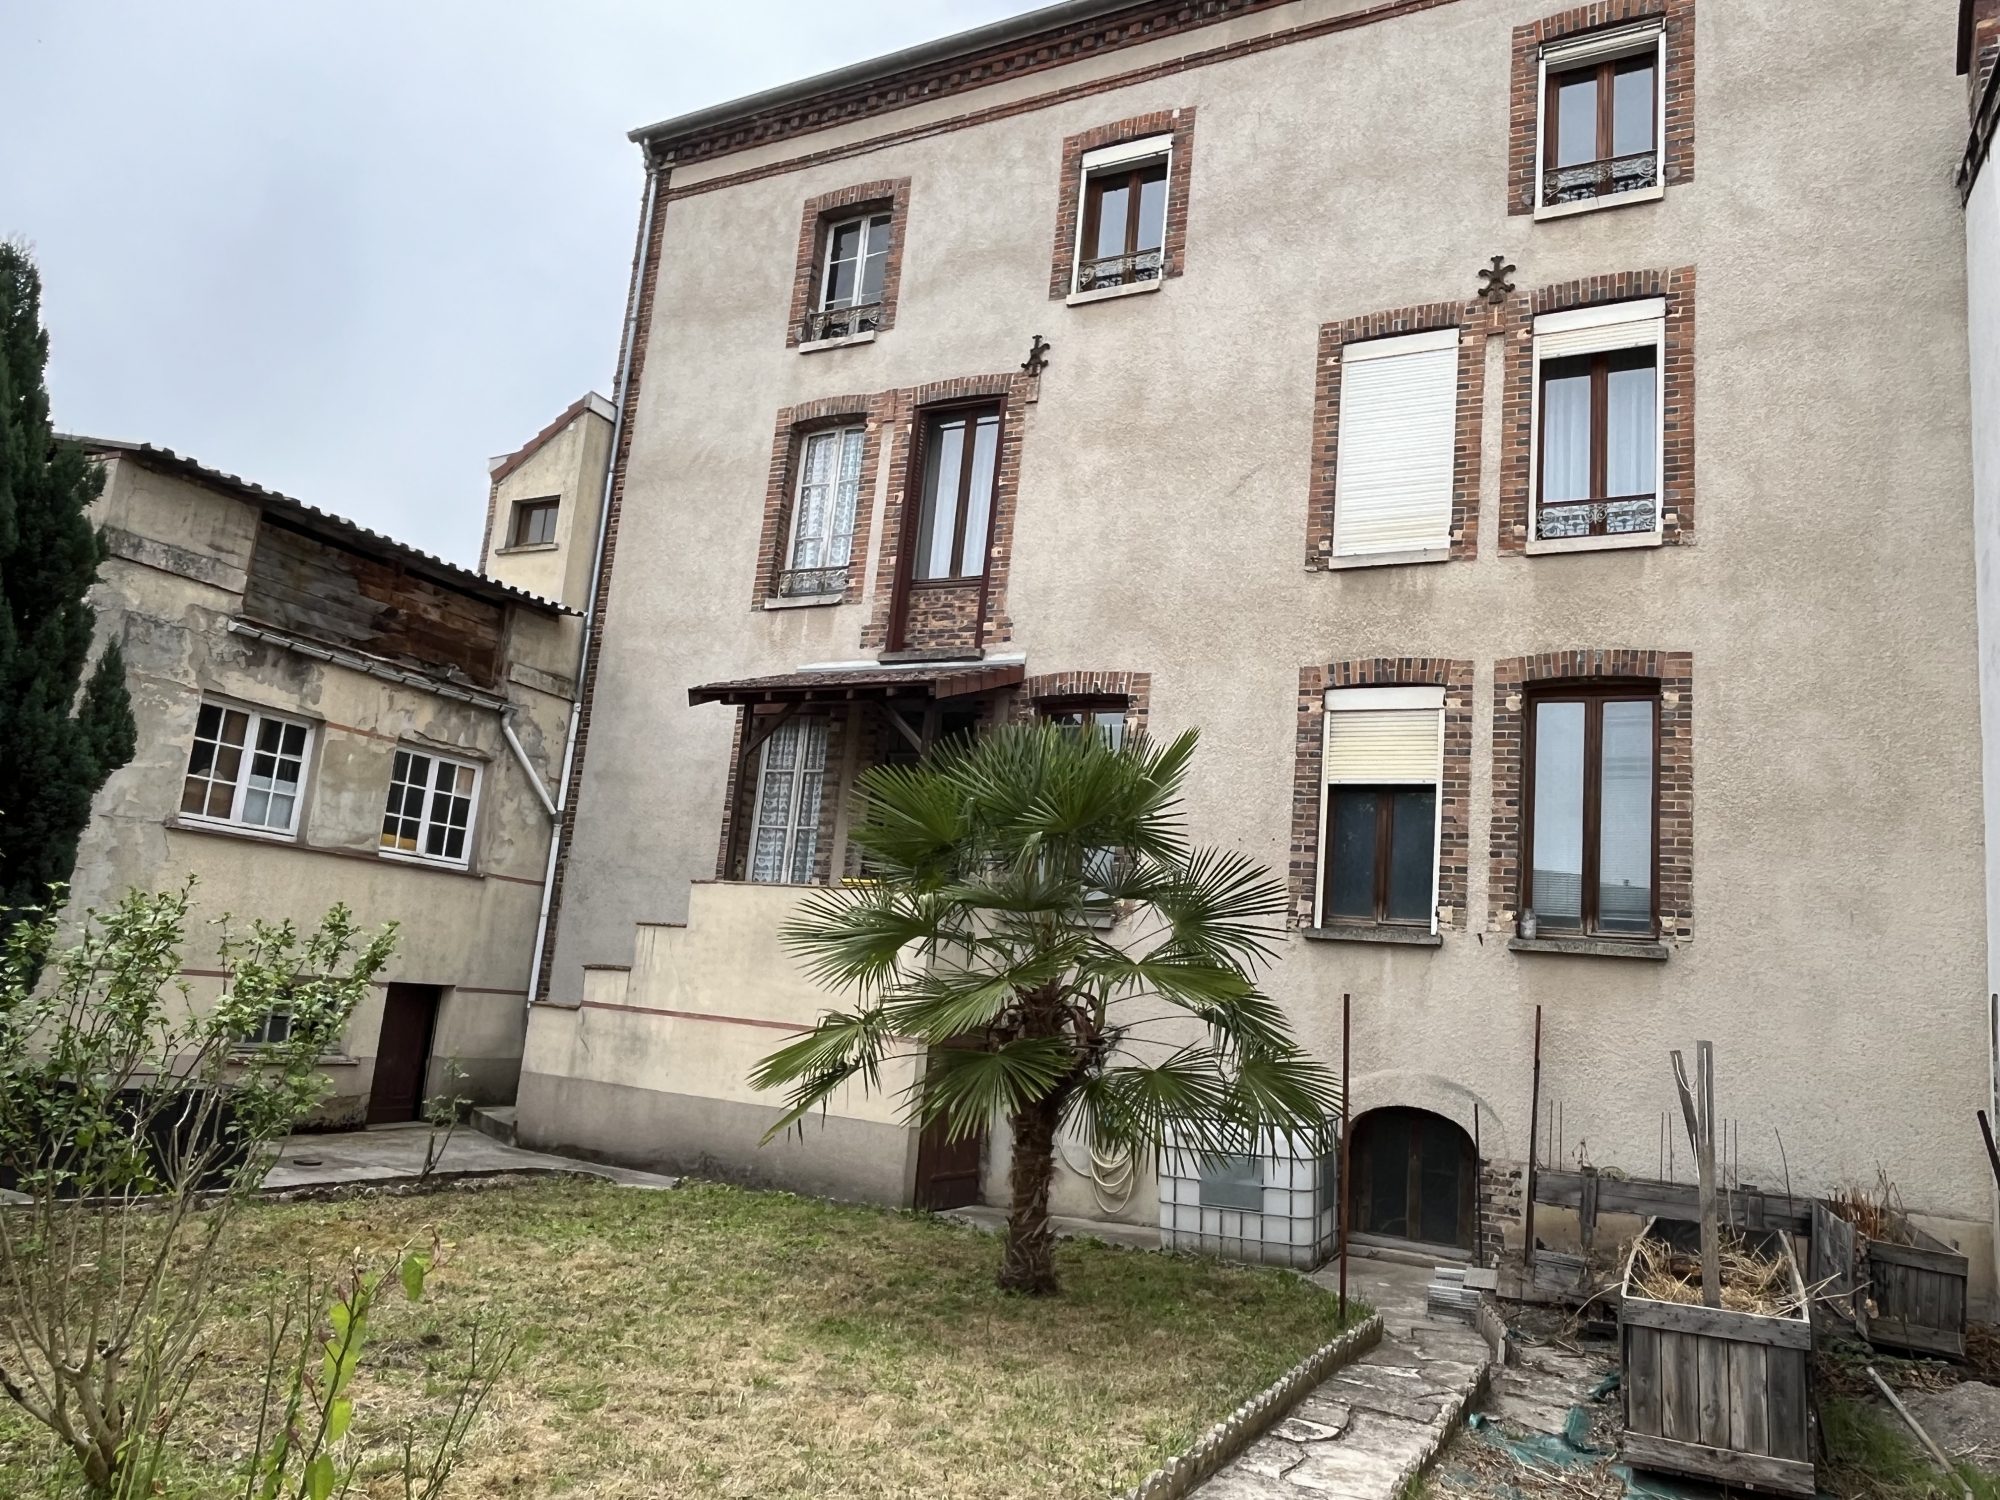 Immobilier vente à EPERNAY Maison - Type 7